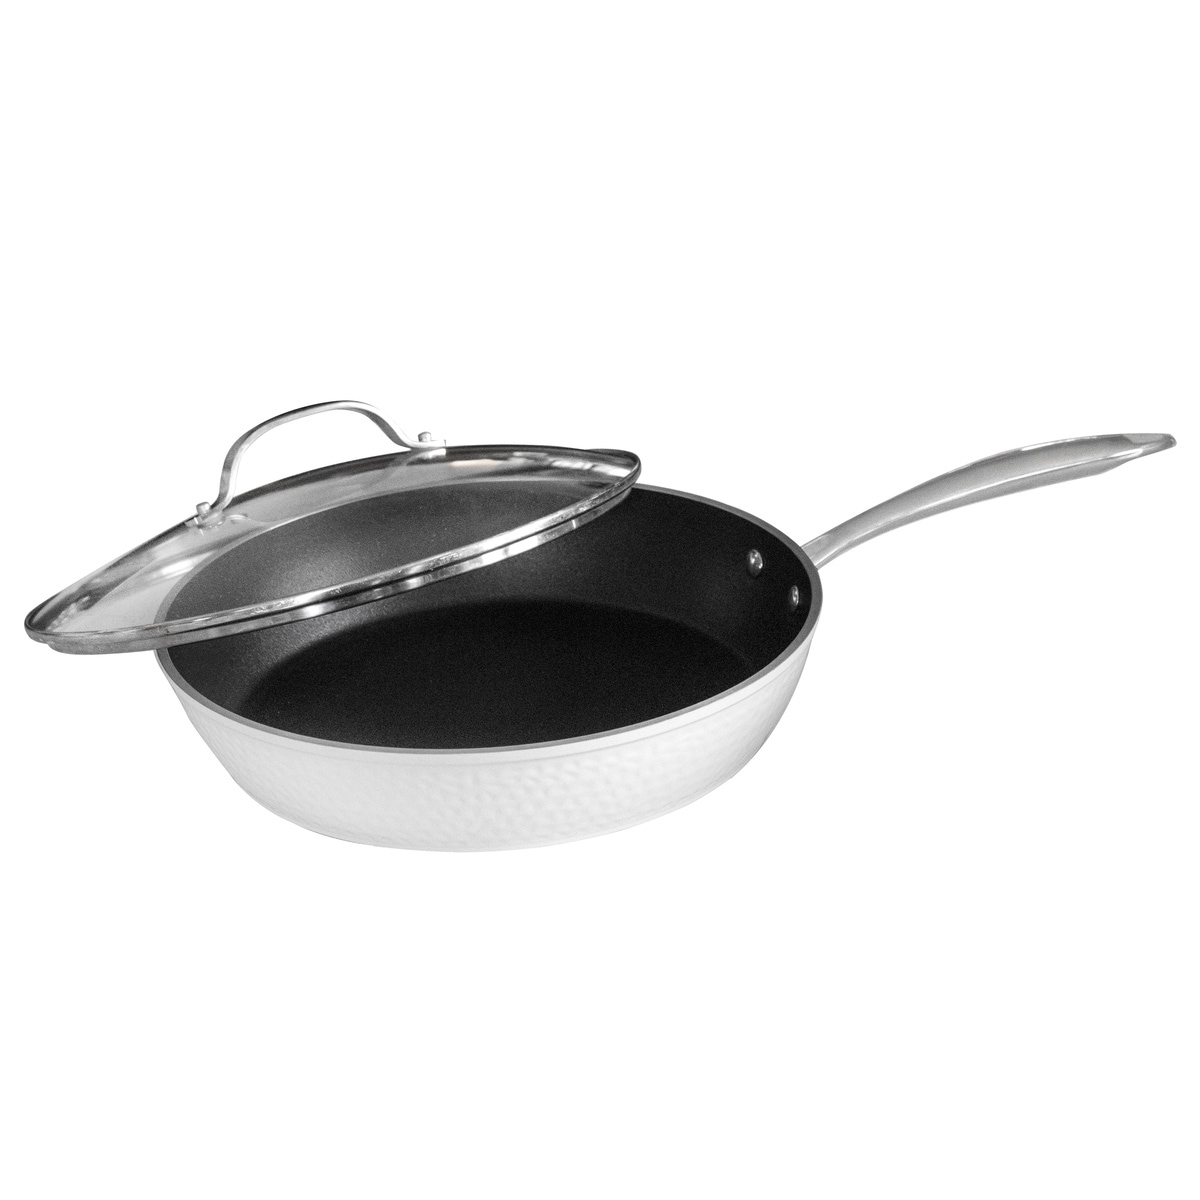 The Orgreenic Frying Pan: Does It Really Do That?